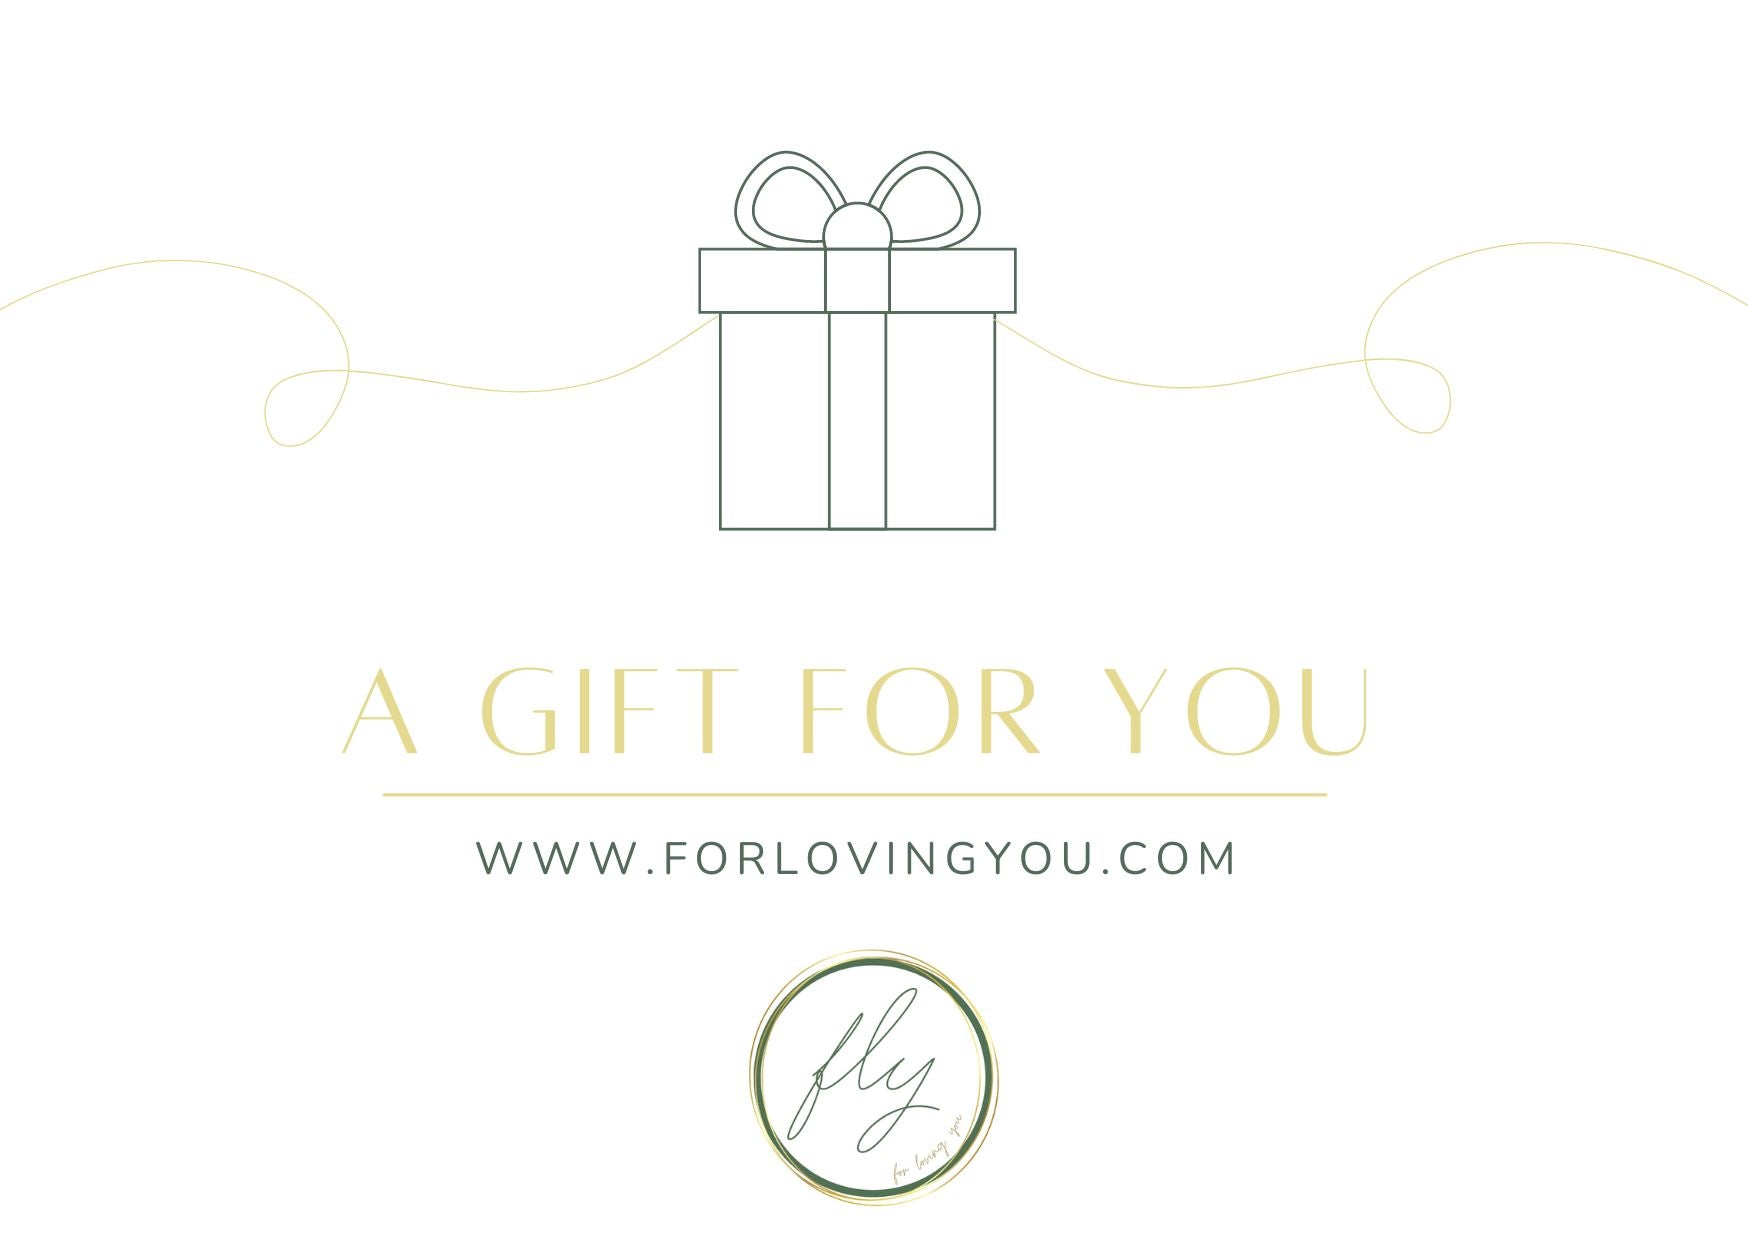 For Loving You Gift Card Voucher